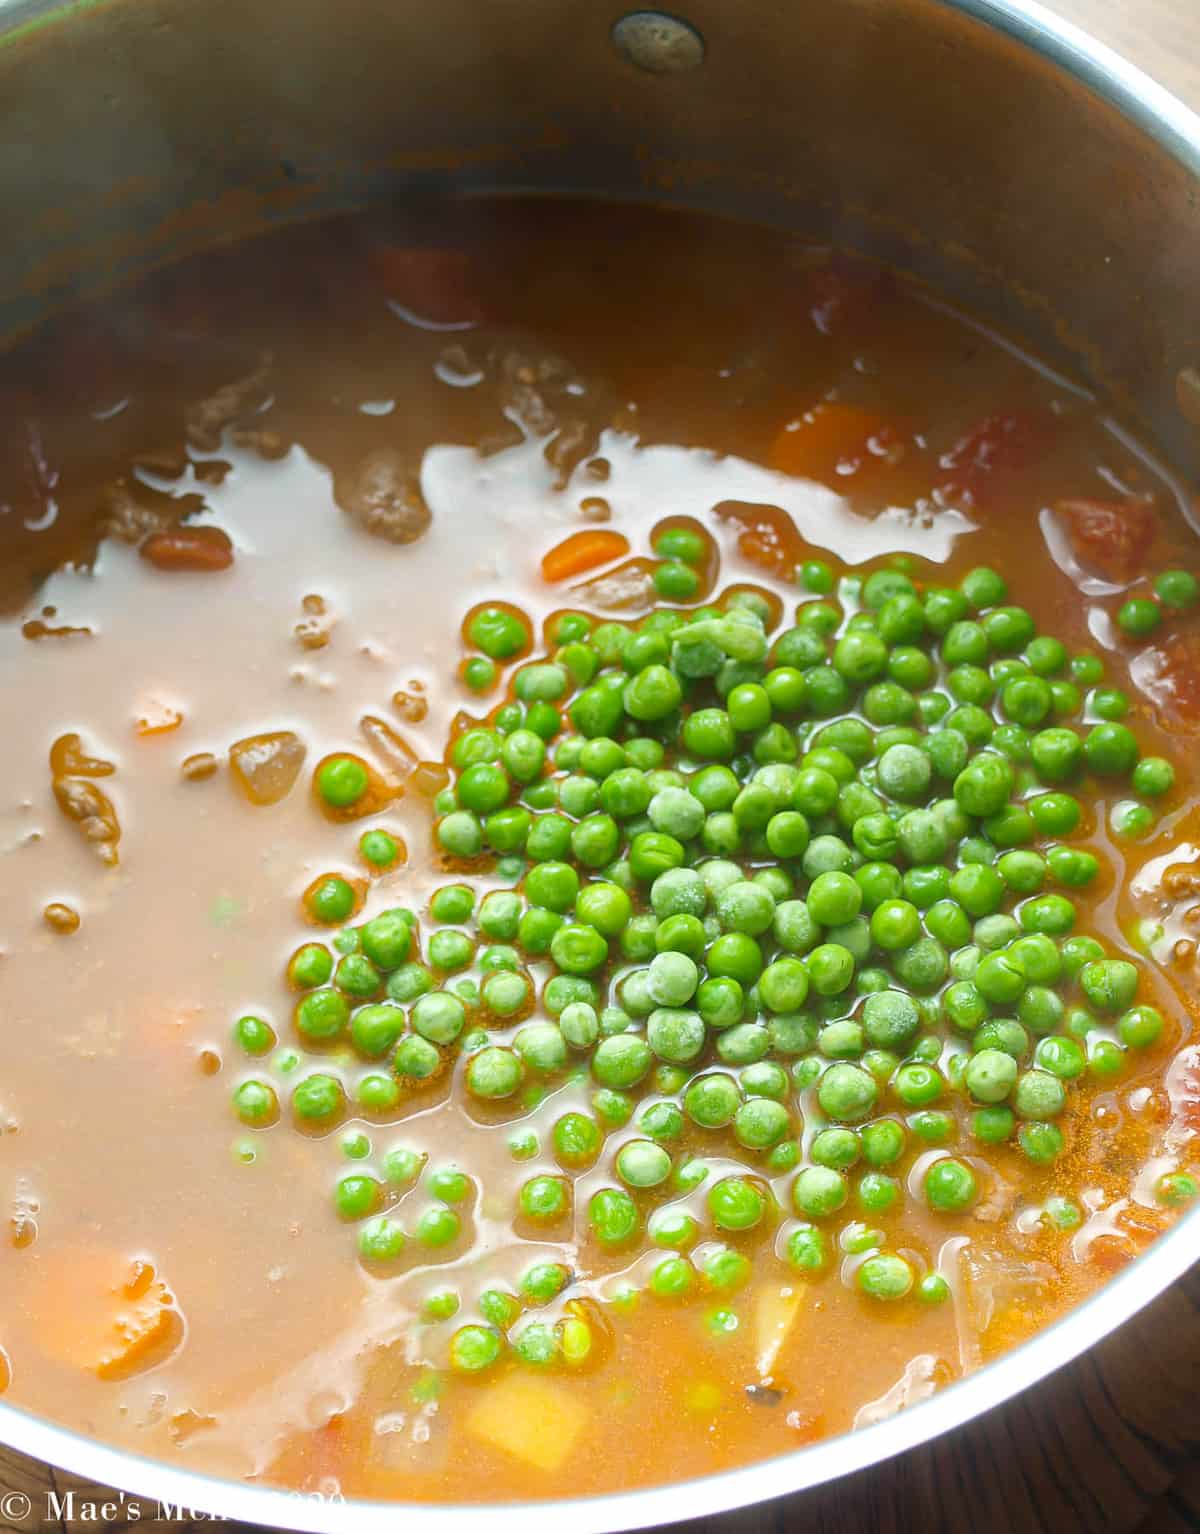 Adding peas to the pot of soup